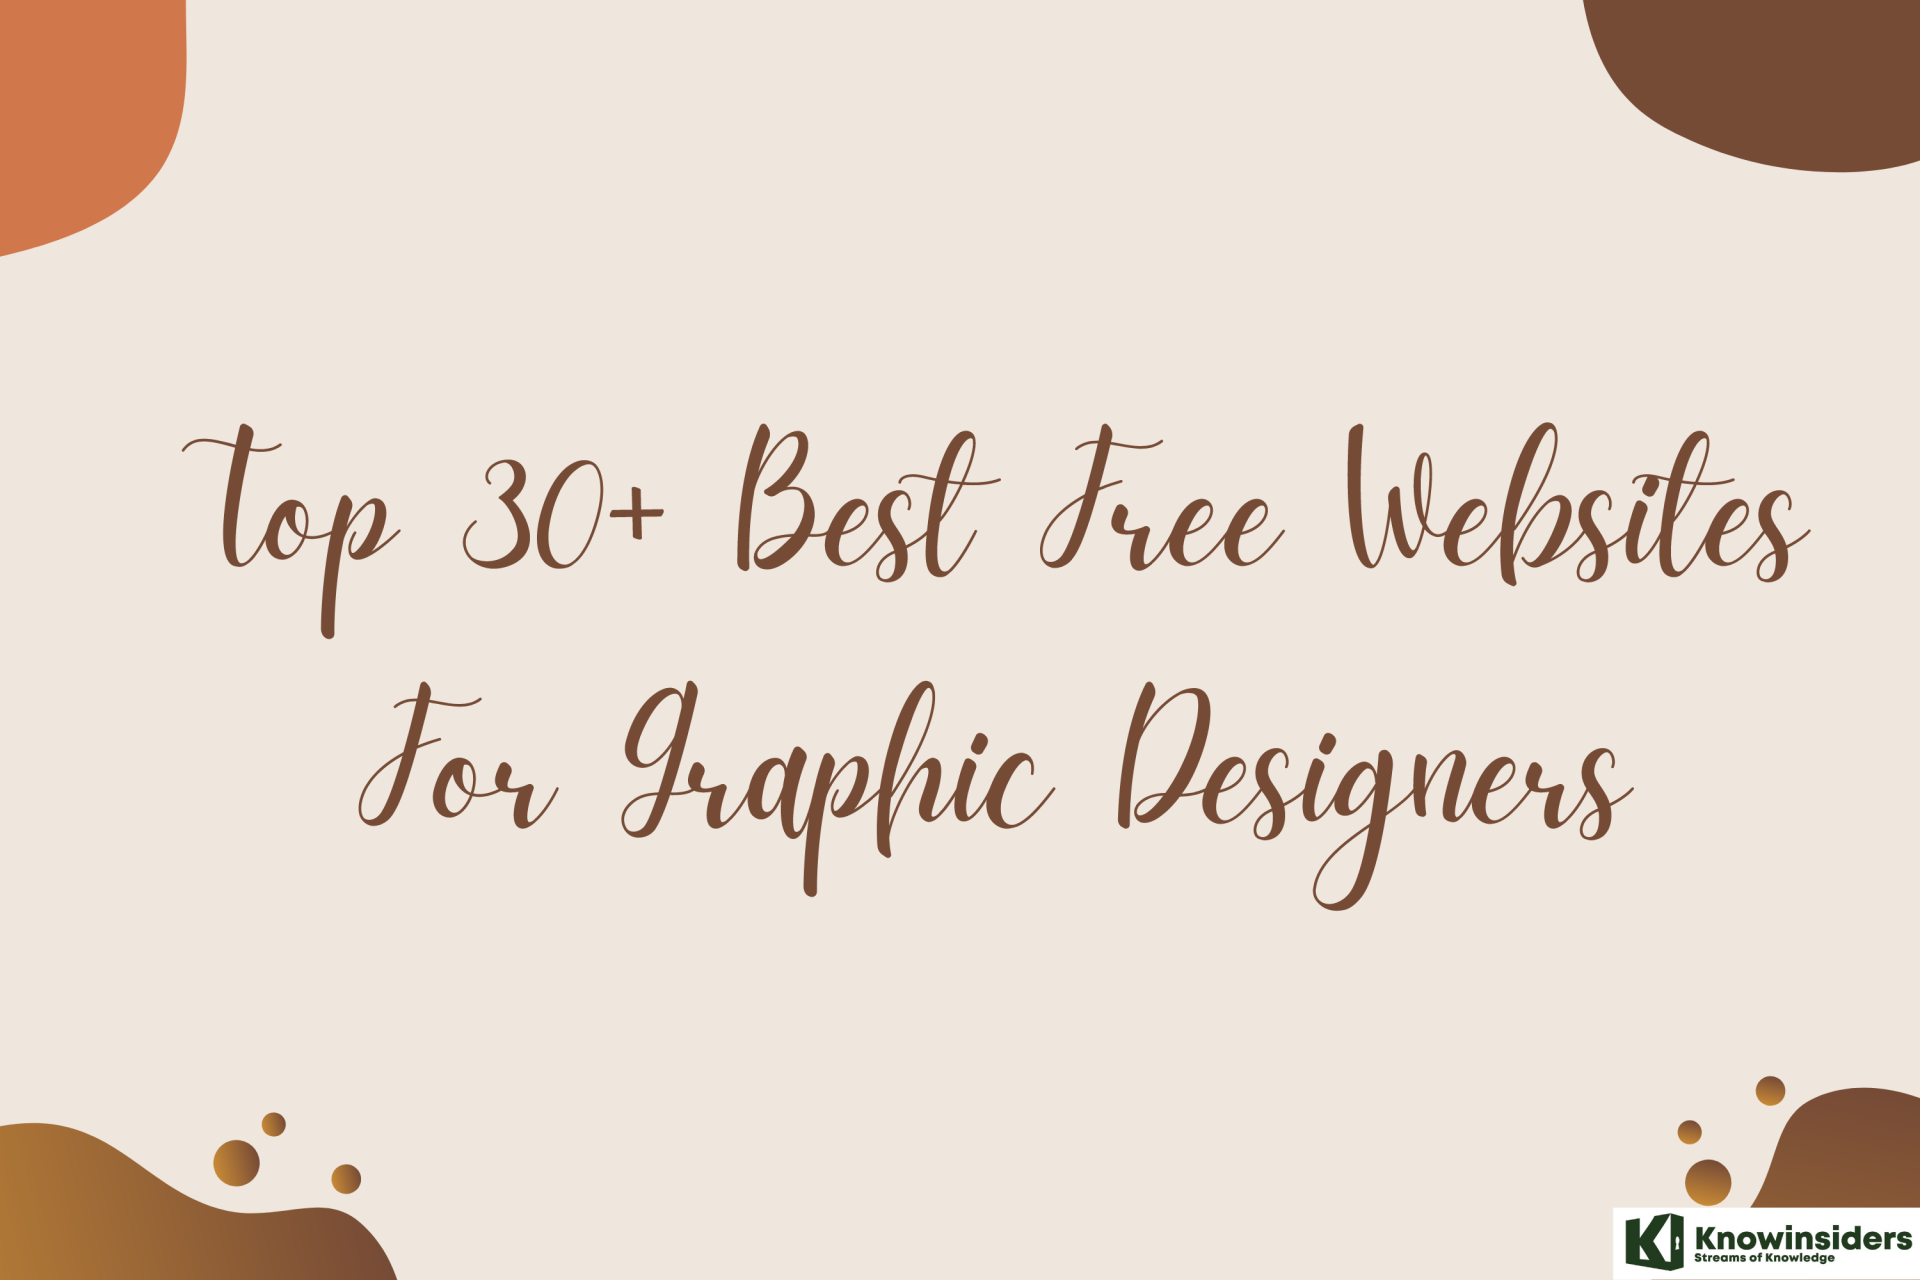 Top 30+ Best Free Websites For Graphic Designers